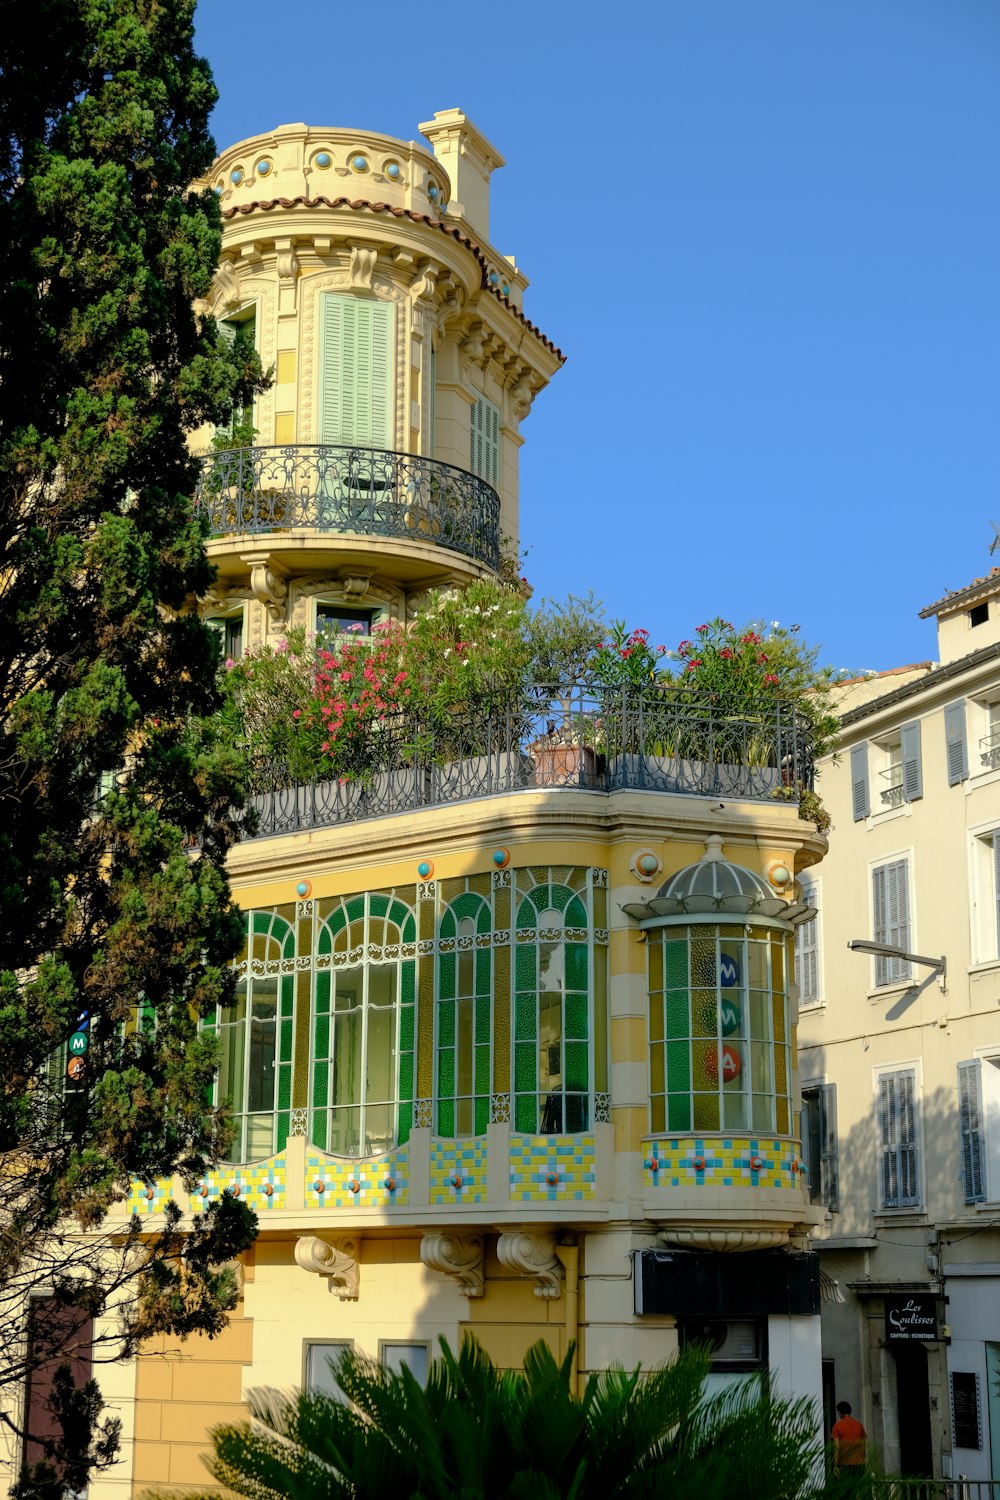 a yellow building with green windows and balconies